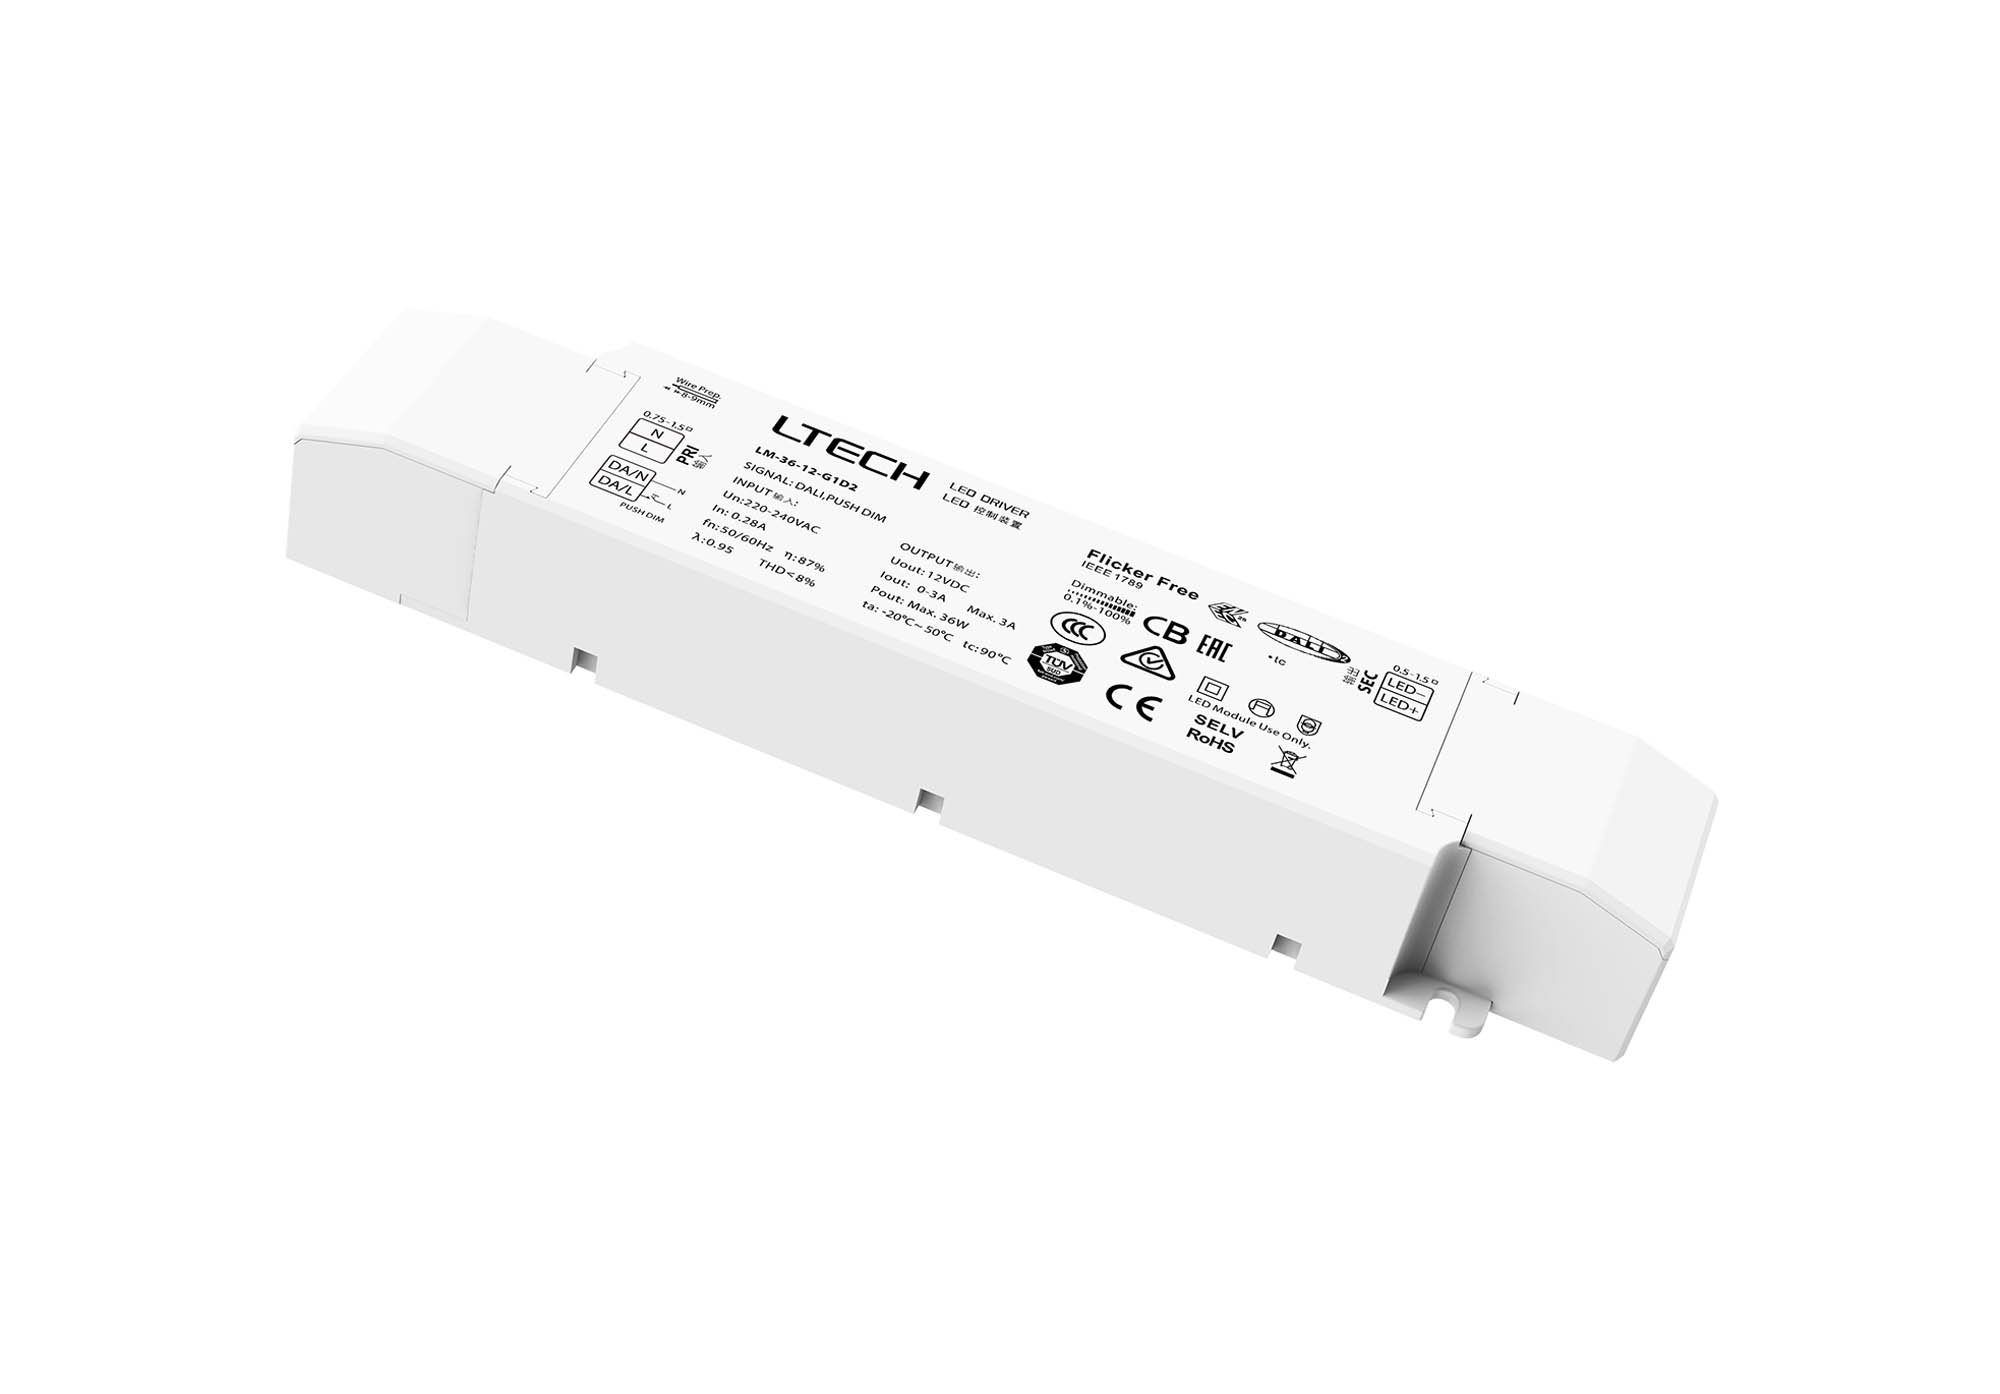 LM-36-12-G1D2  DALI, Push Dim, PWM, 36W, C. Voltage Linear Dimmable Driver, 12V, Max Current Output: 3A, EFF>91.5%, 5yrs Warranty.